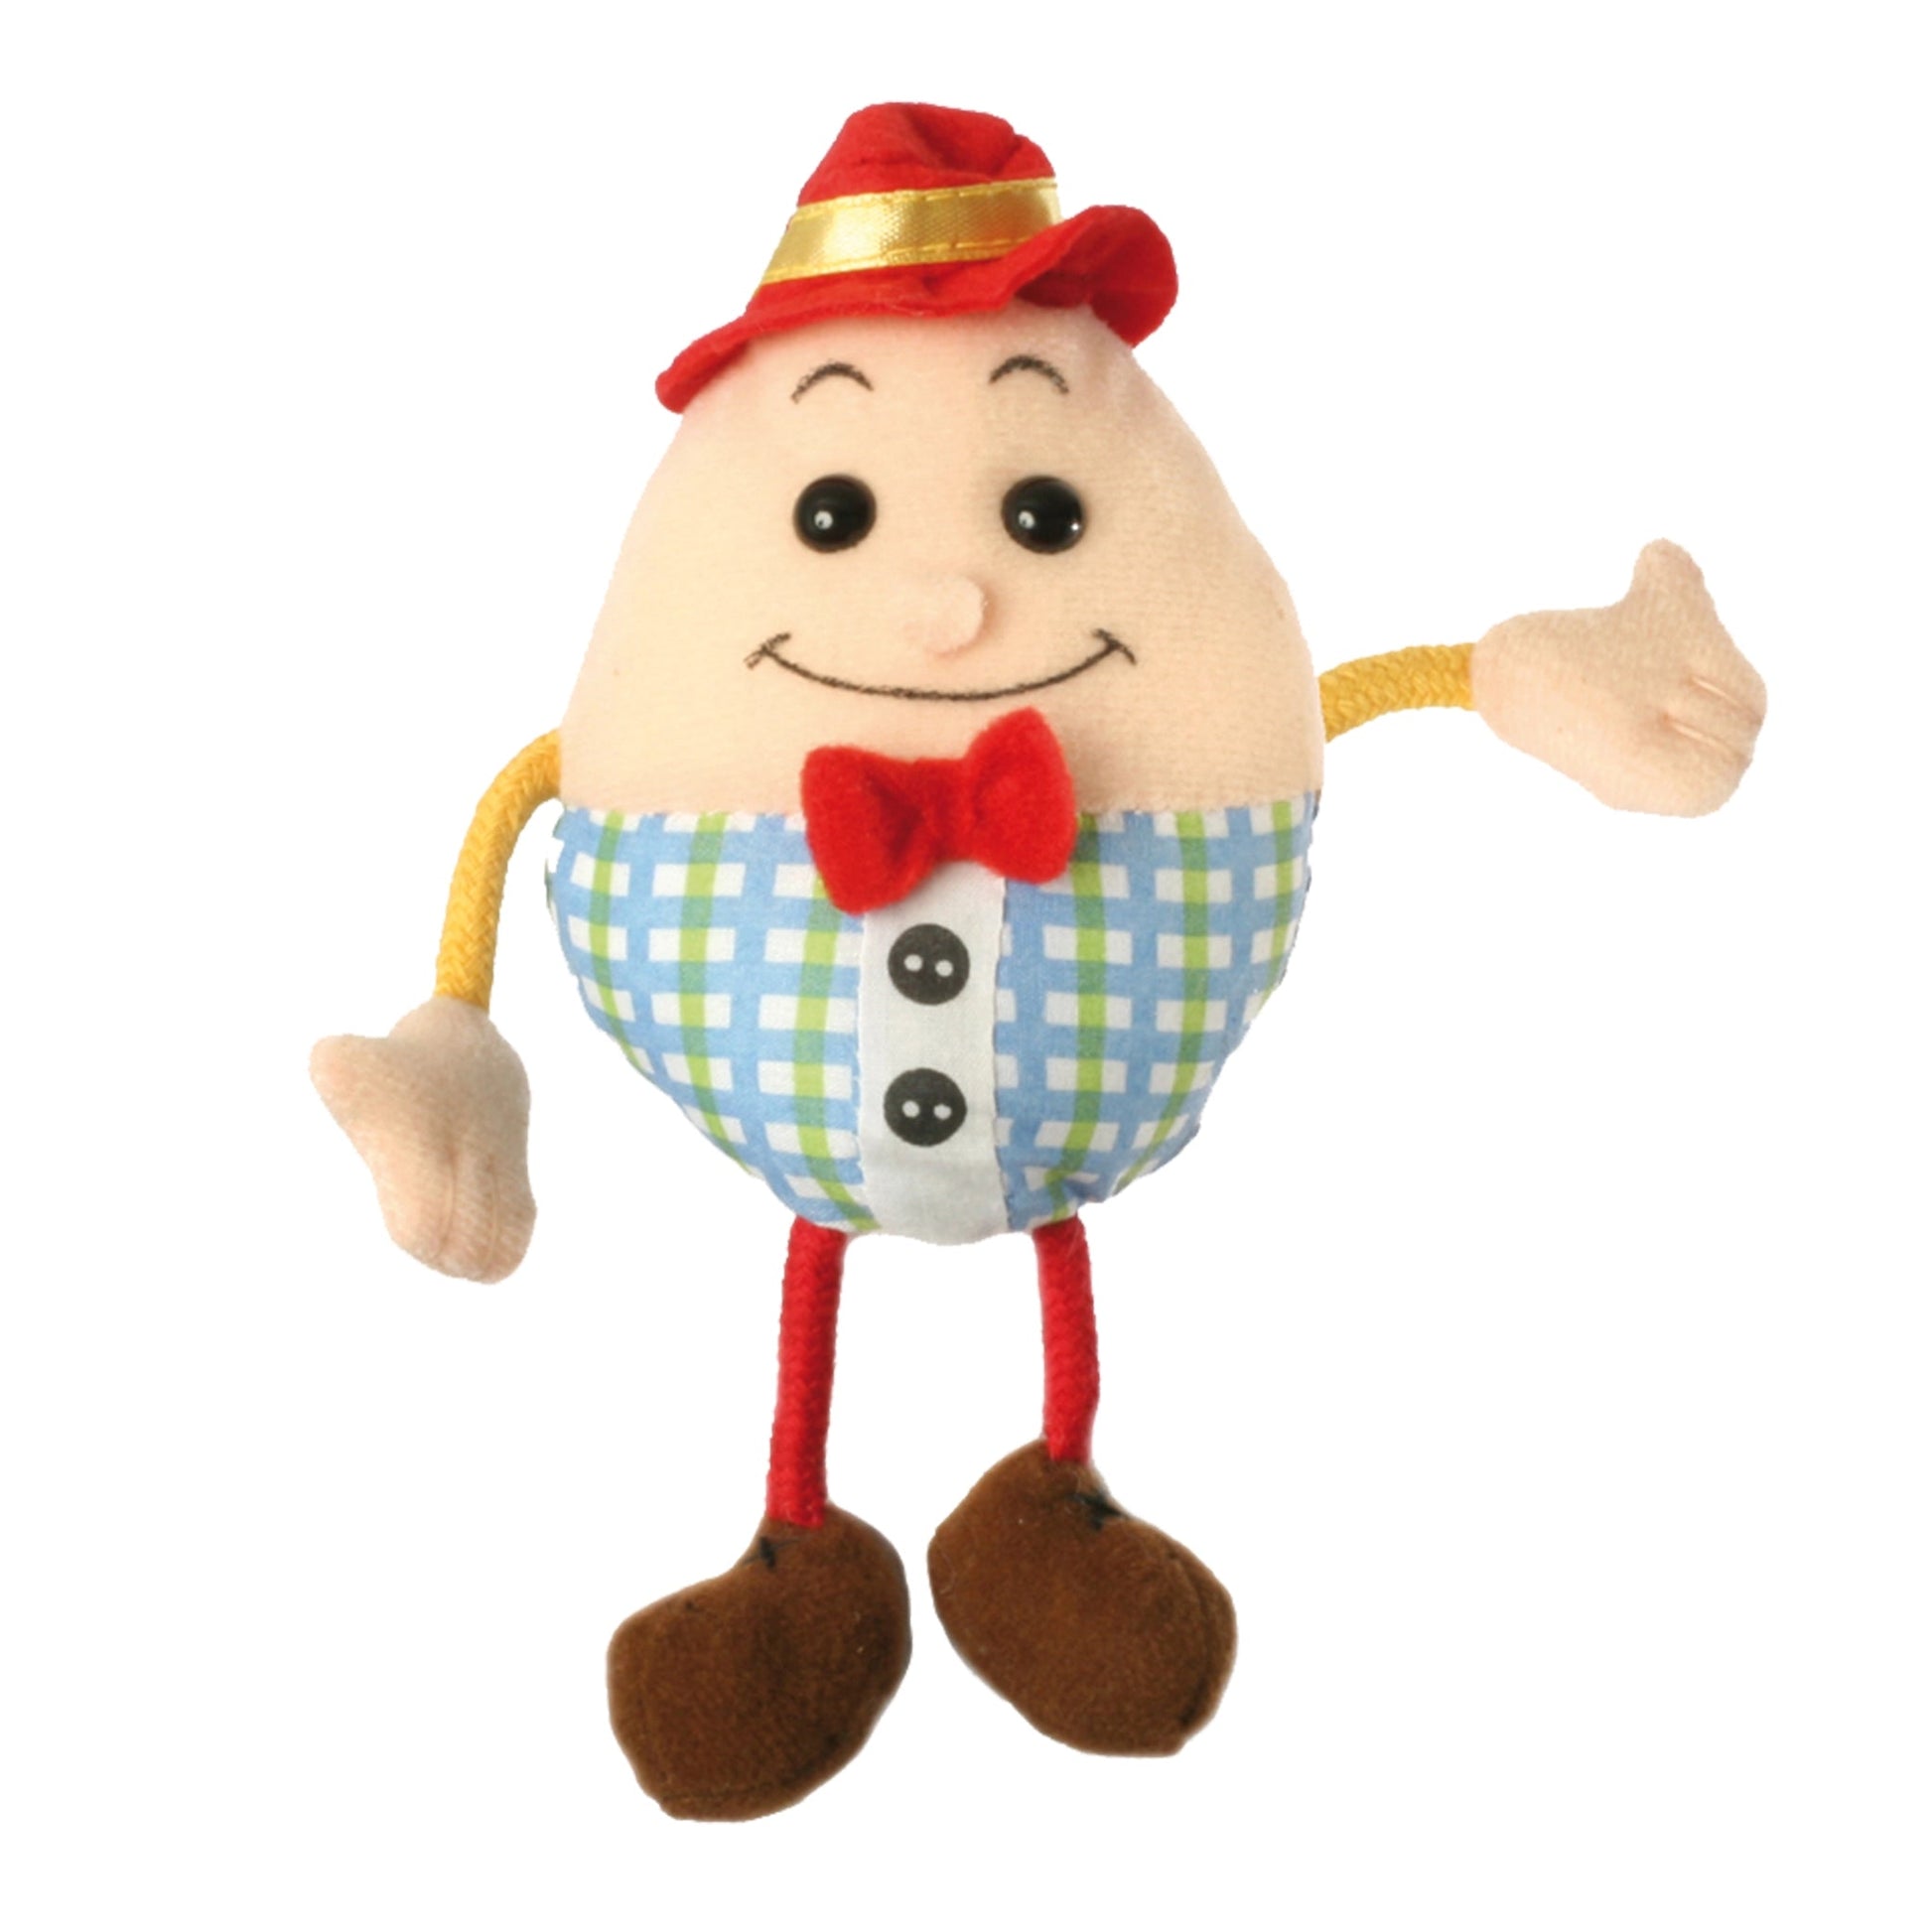 Humpty Dumpty Finger Puppet - The Puppet Company - The Forgotten Toy Shop